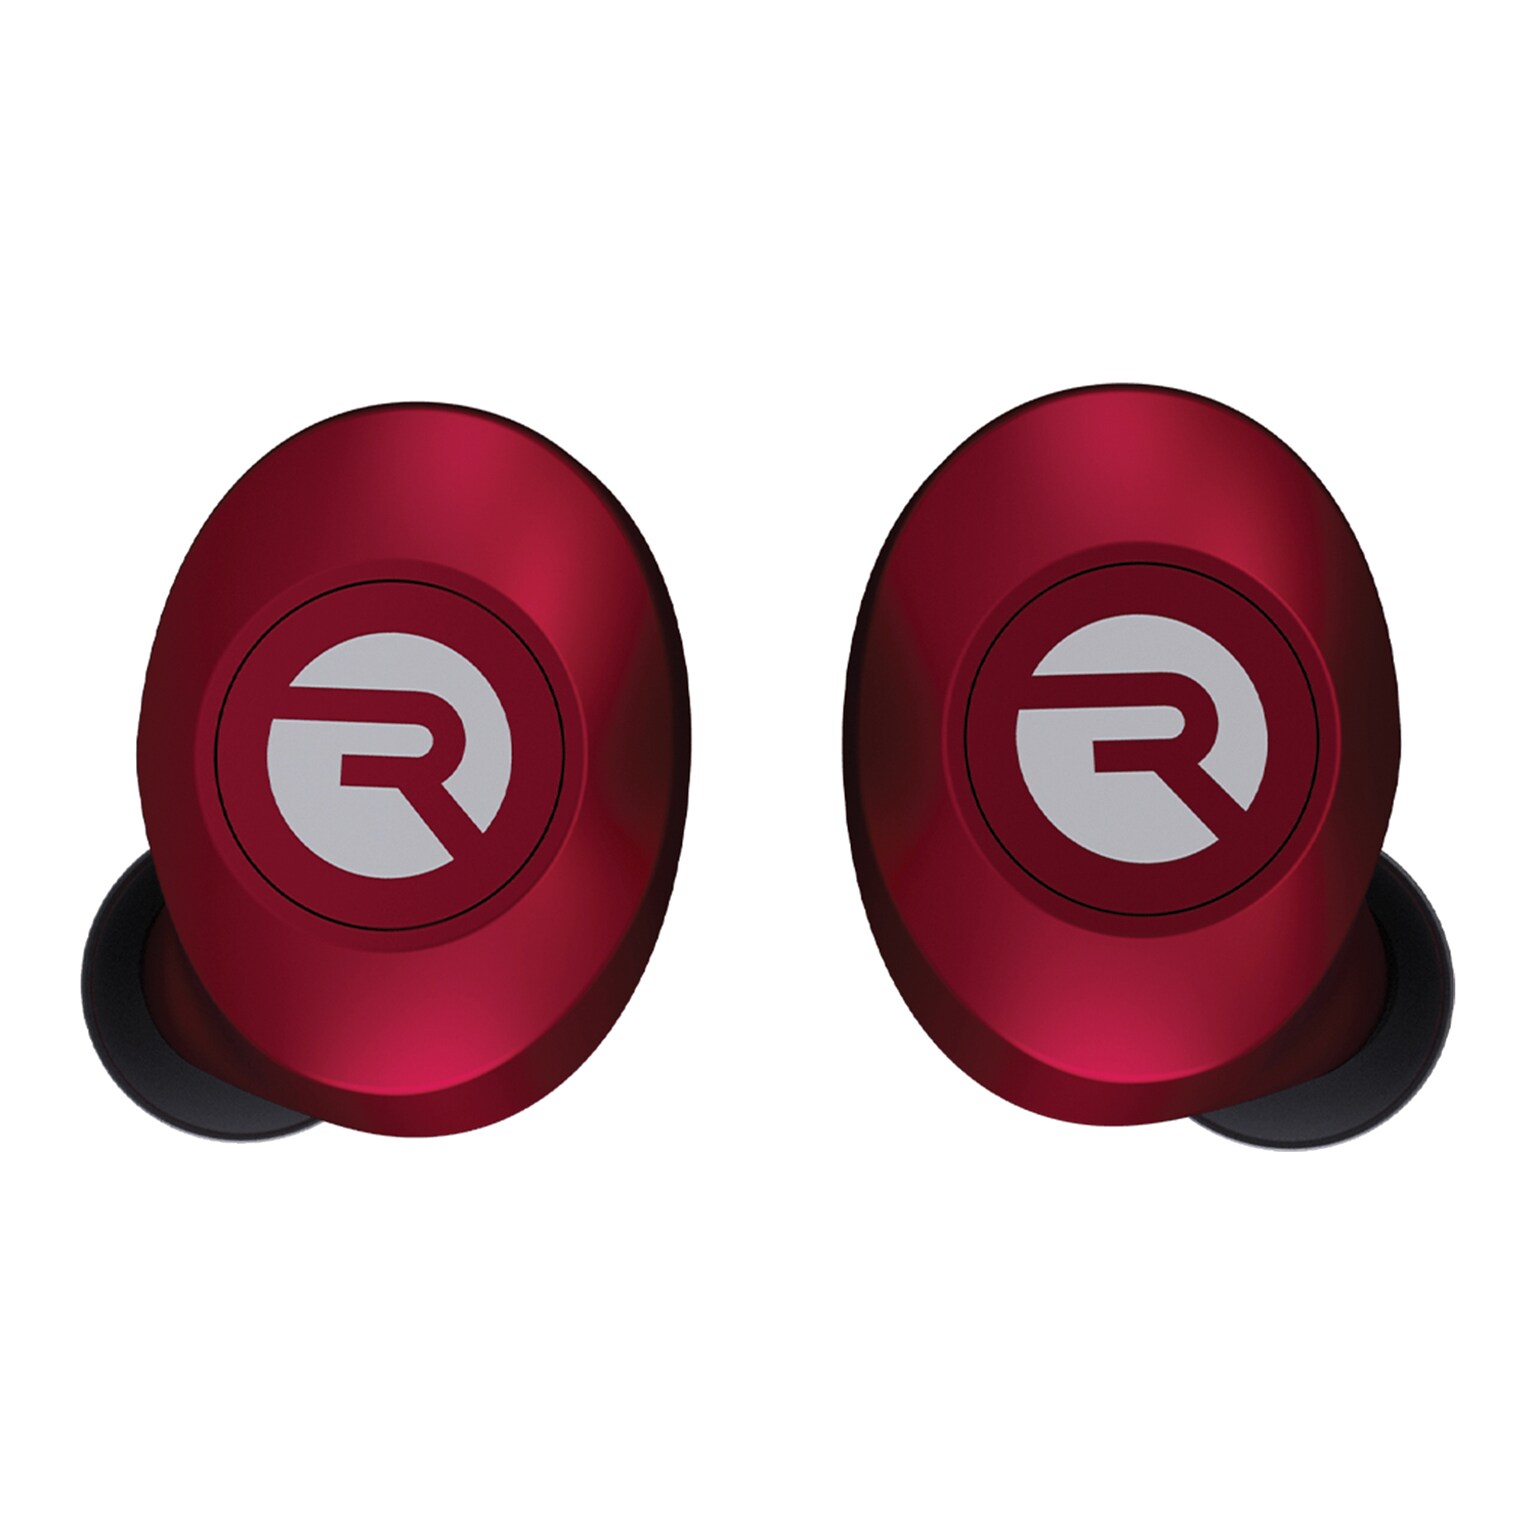 Raycon The Everyday In-Ear True Wireless Stereo BT Earbuds with Mic and Charging Case, Flare Red (RBE725-21E-RED)